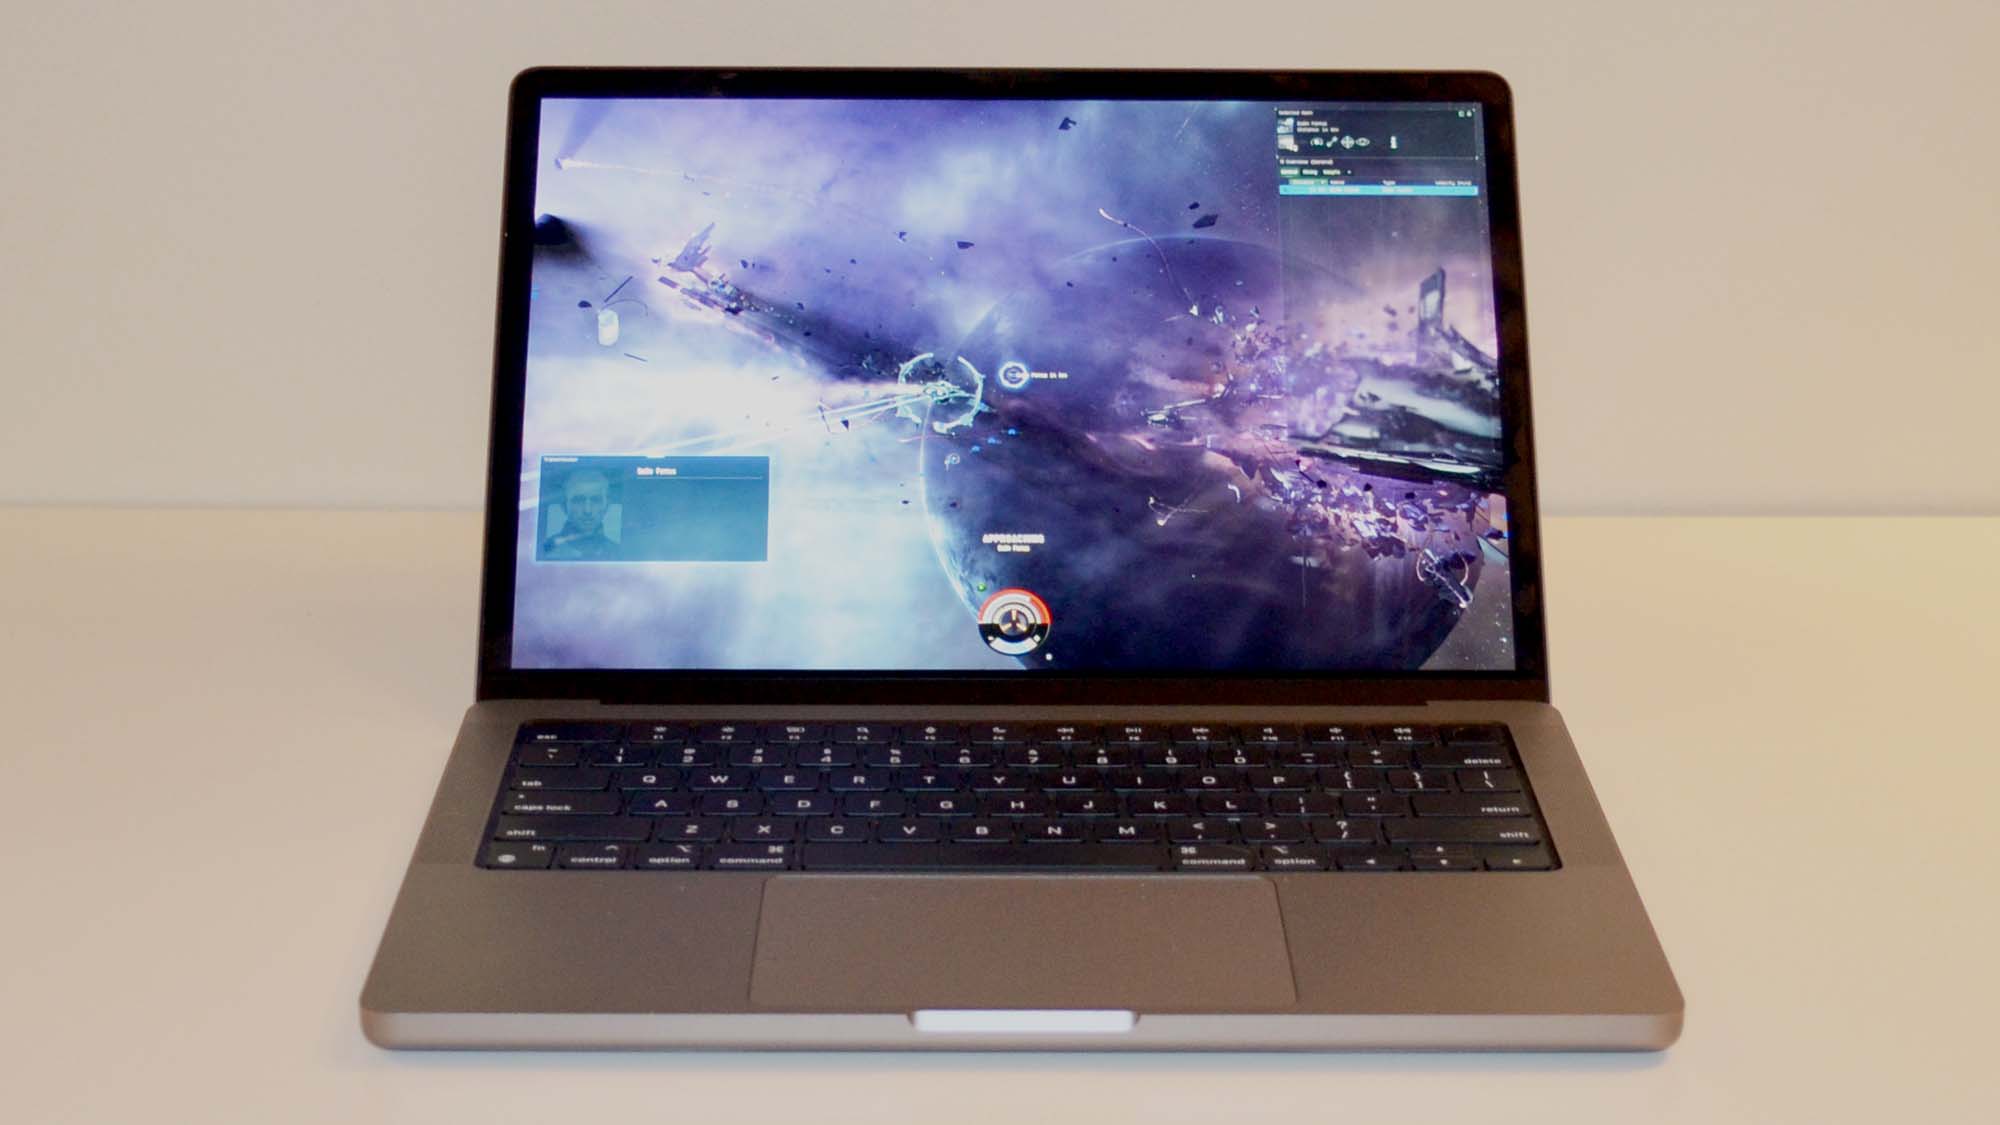 The future of Mac gaming might just convert a PC loyalist like me